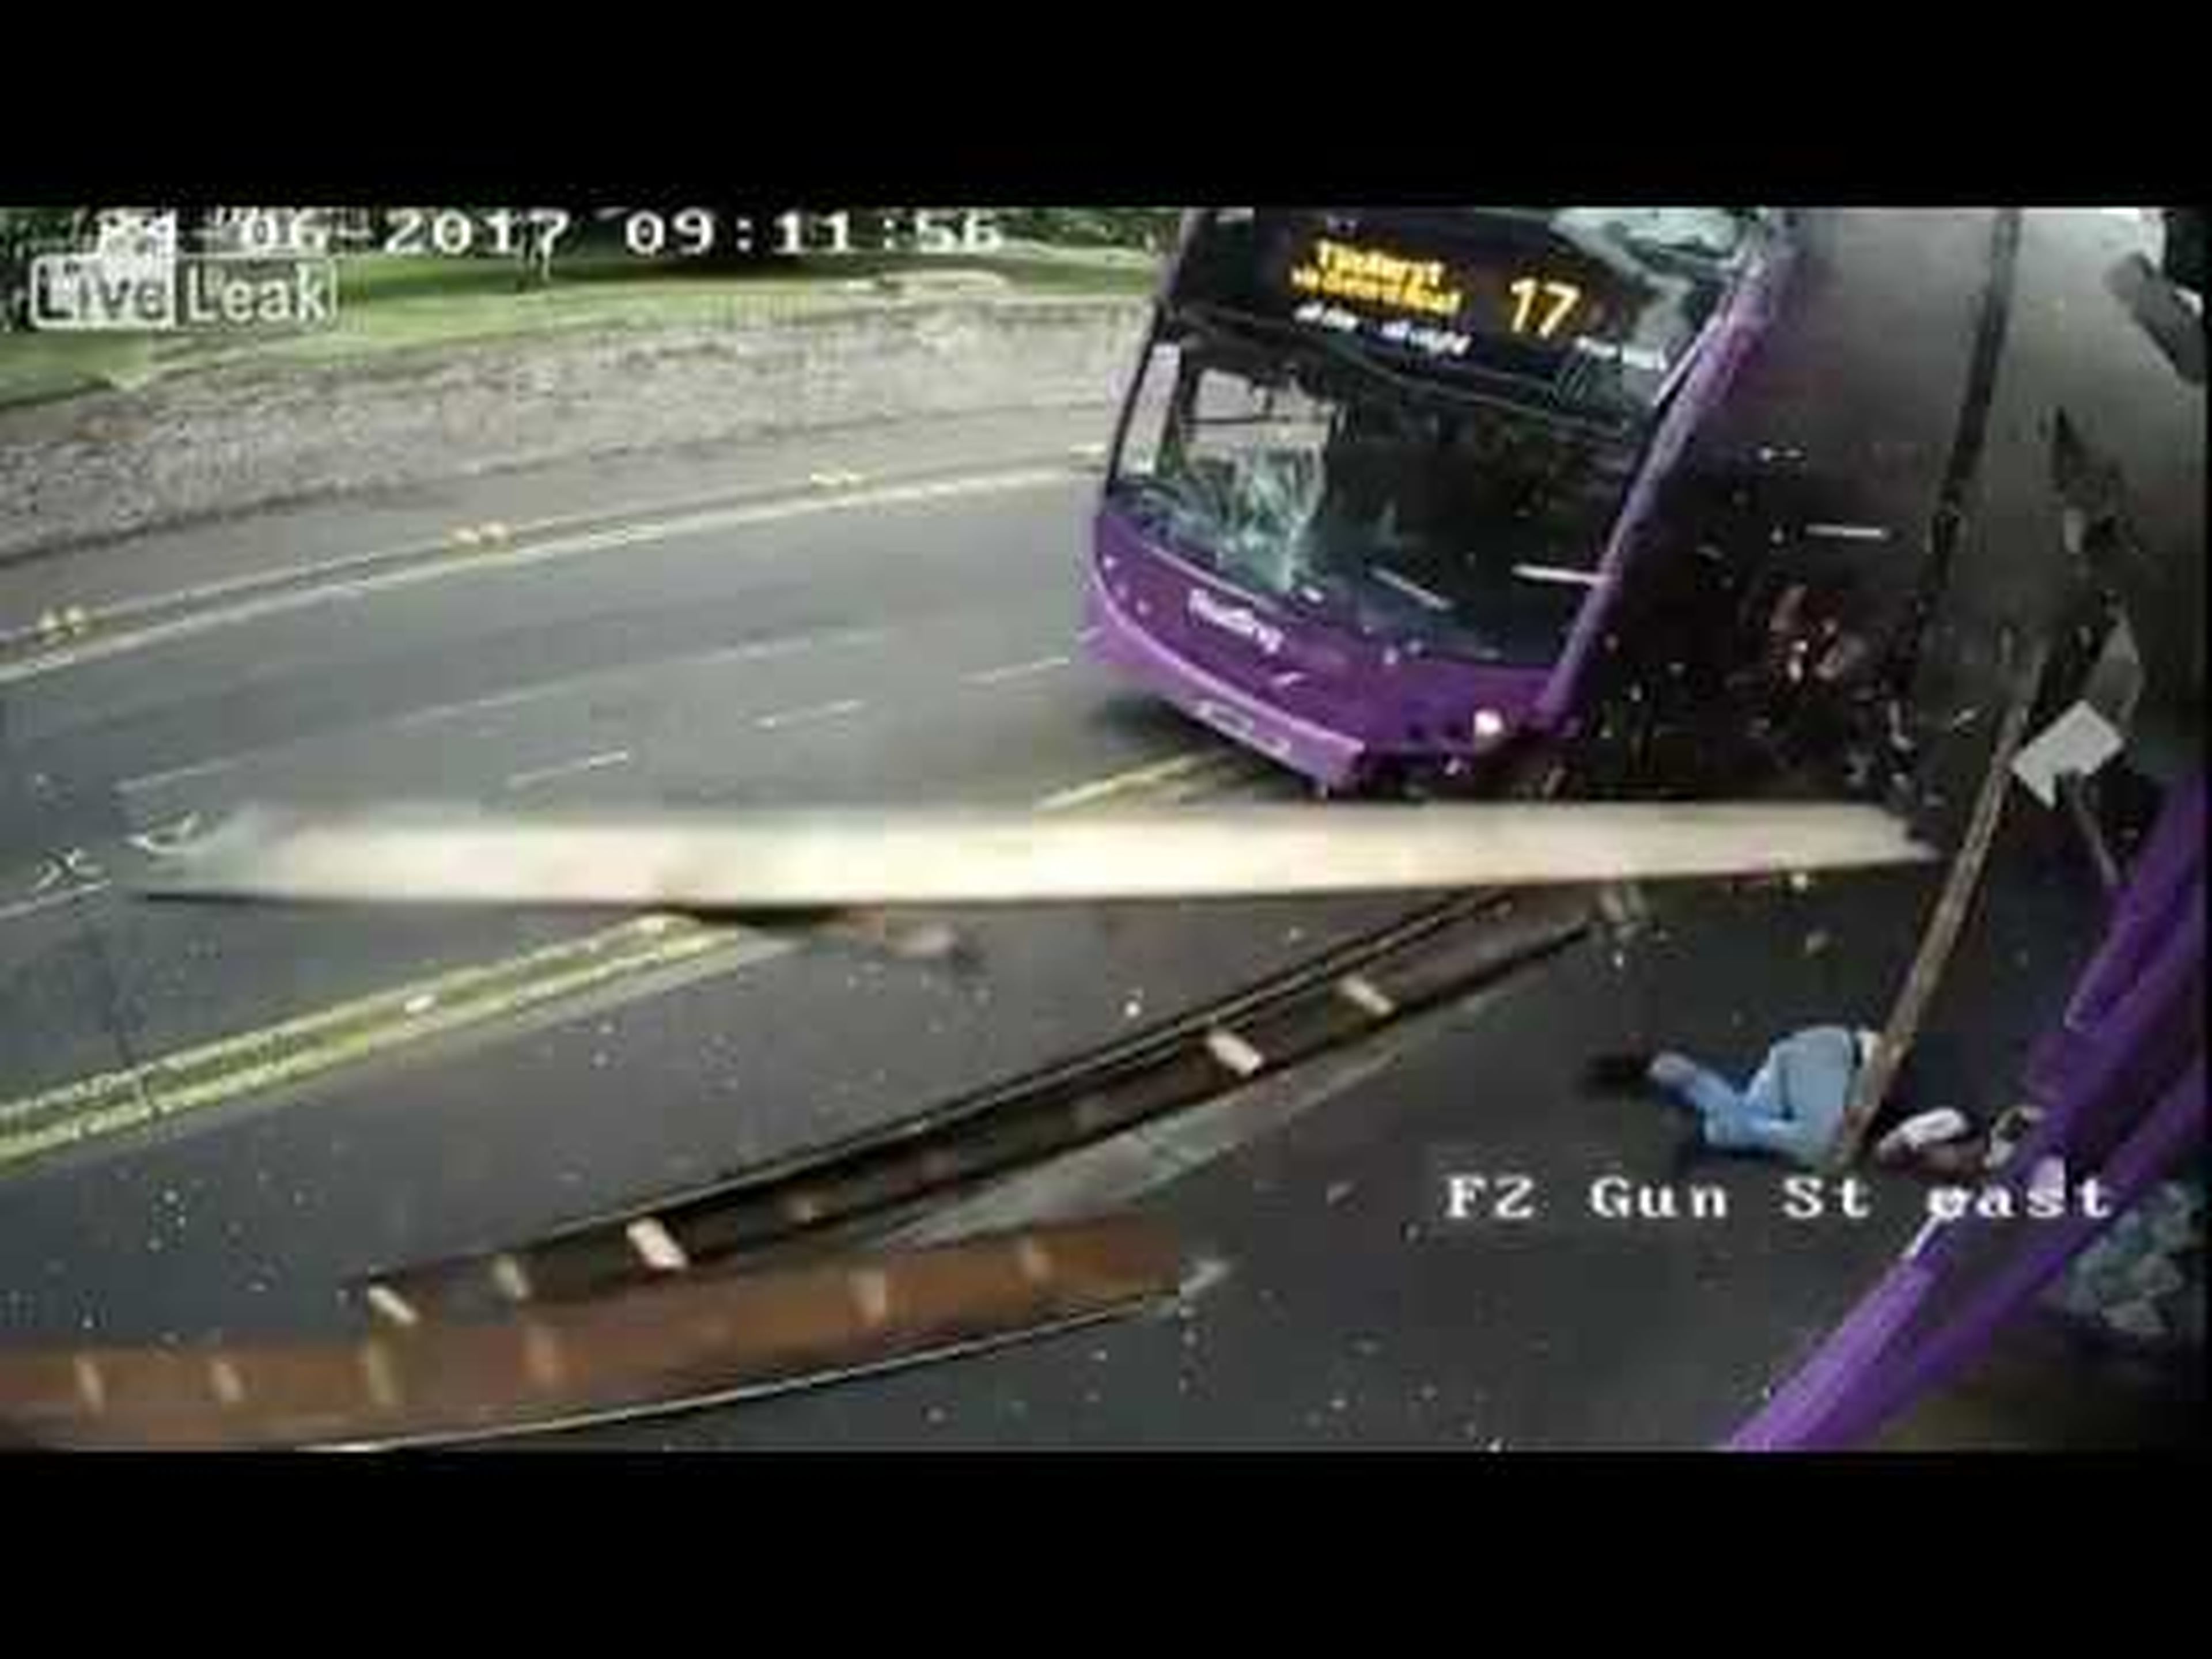 Man brutally struck by Bus, proceeds to walk to the Pub